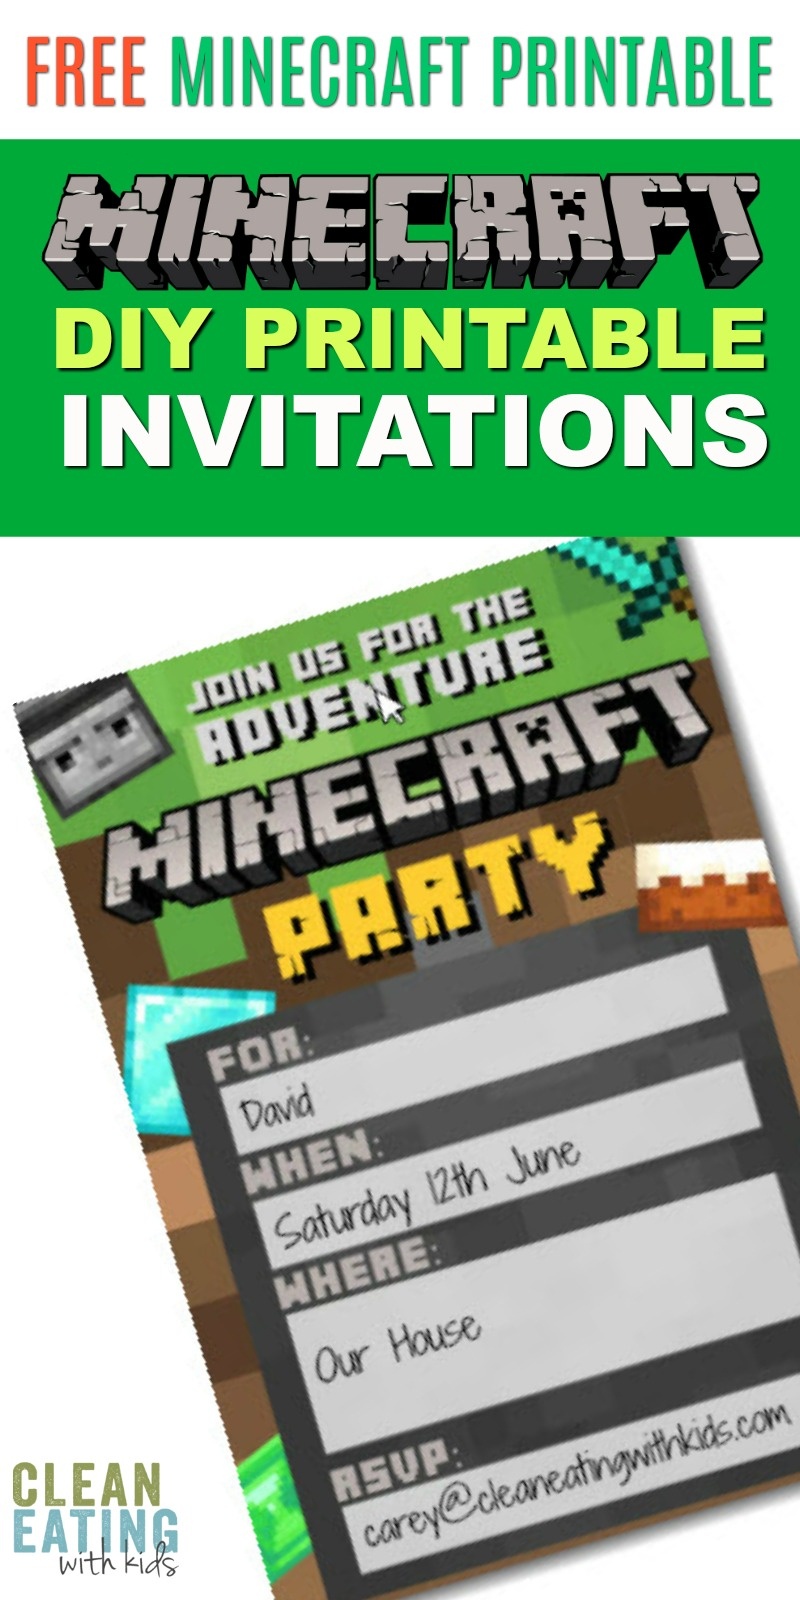 Free Diy Printable Minecraft Birthday Invitation - Clean Eating With - Free Minecraft Party Printables